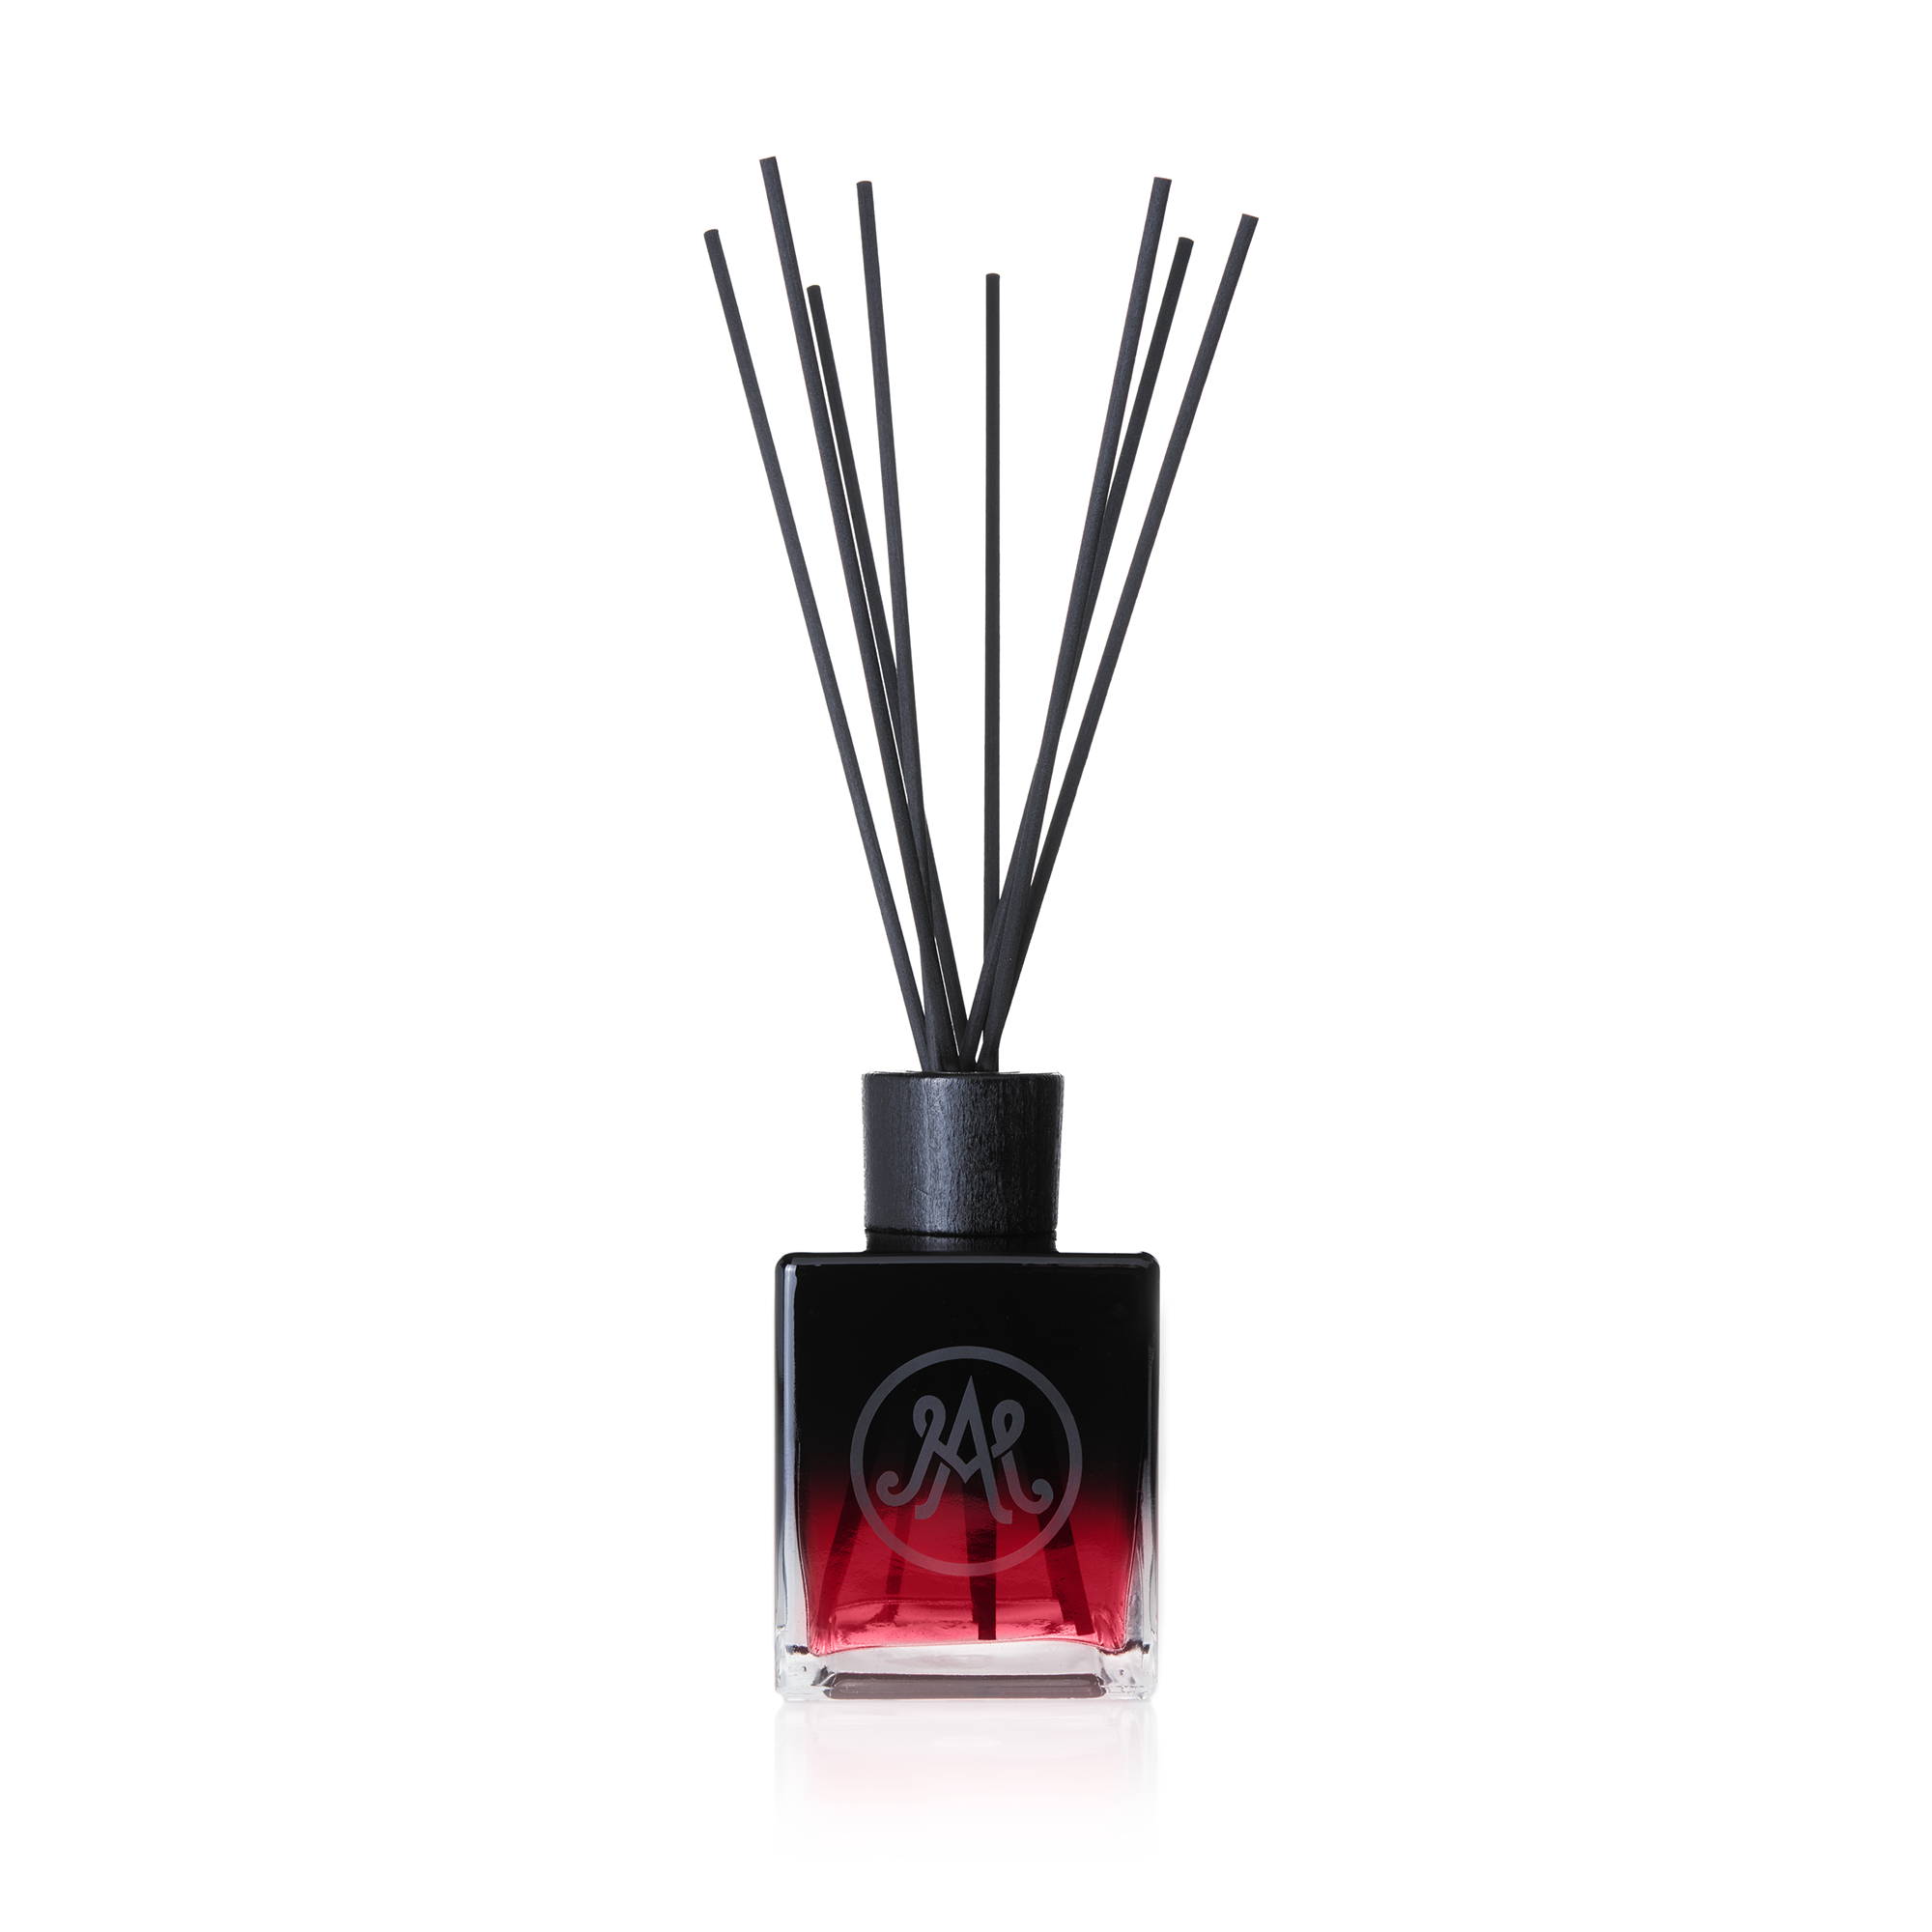 A dark red diffuser with black reeds is displayed, featuring a sleek black cap and an elegant monogram logo on the front of the bottle. Sweet fig blends with the aroma of warm grass and ripe plums.